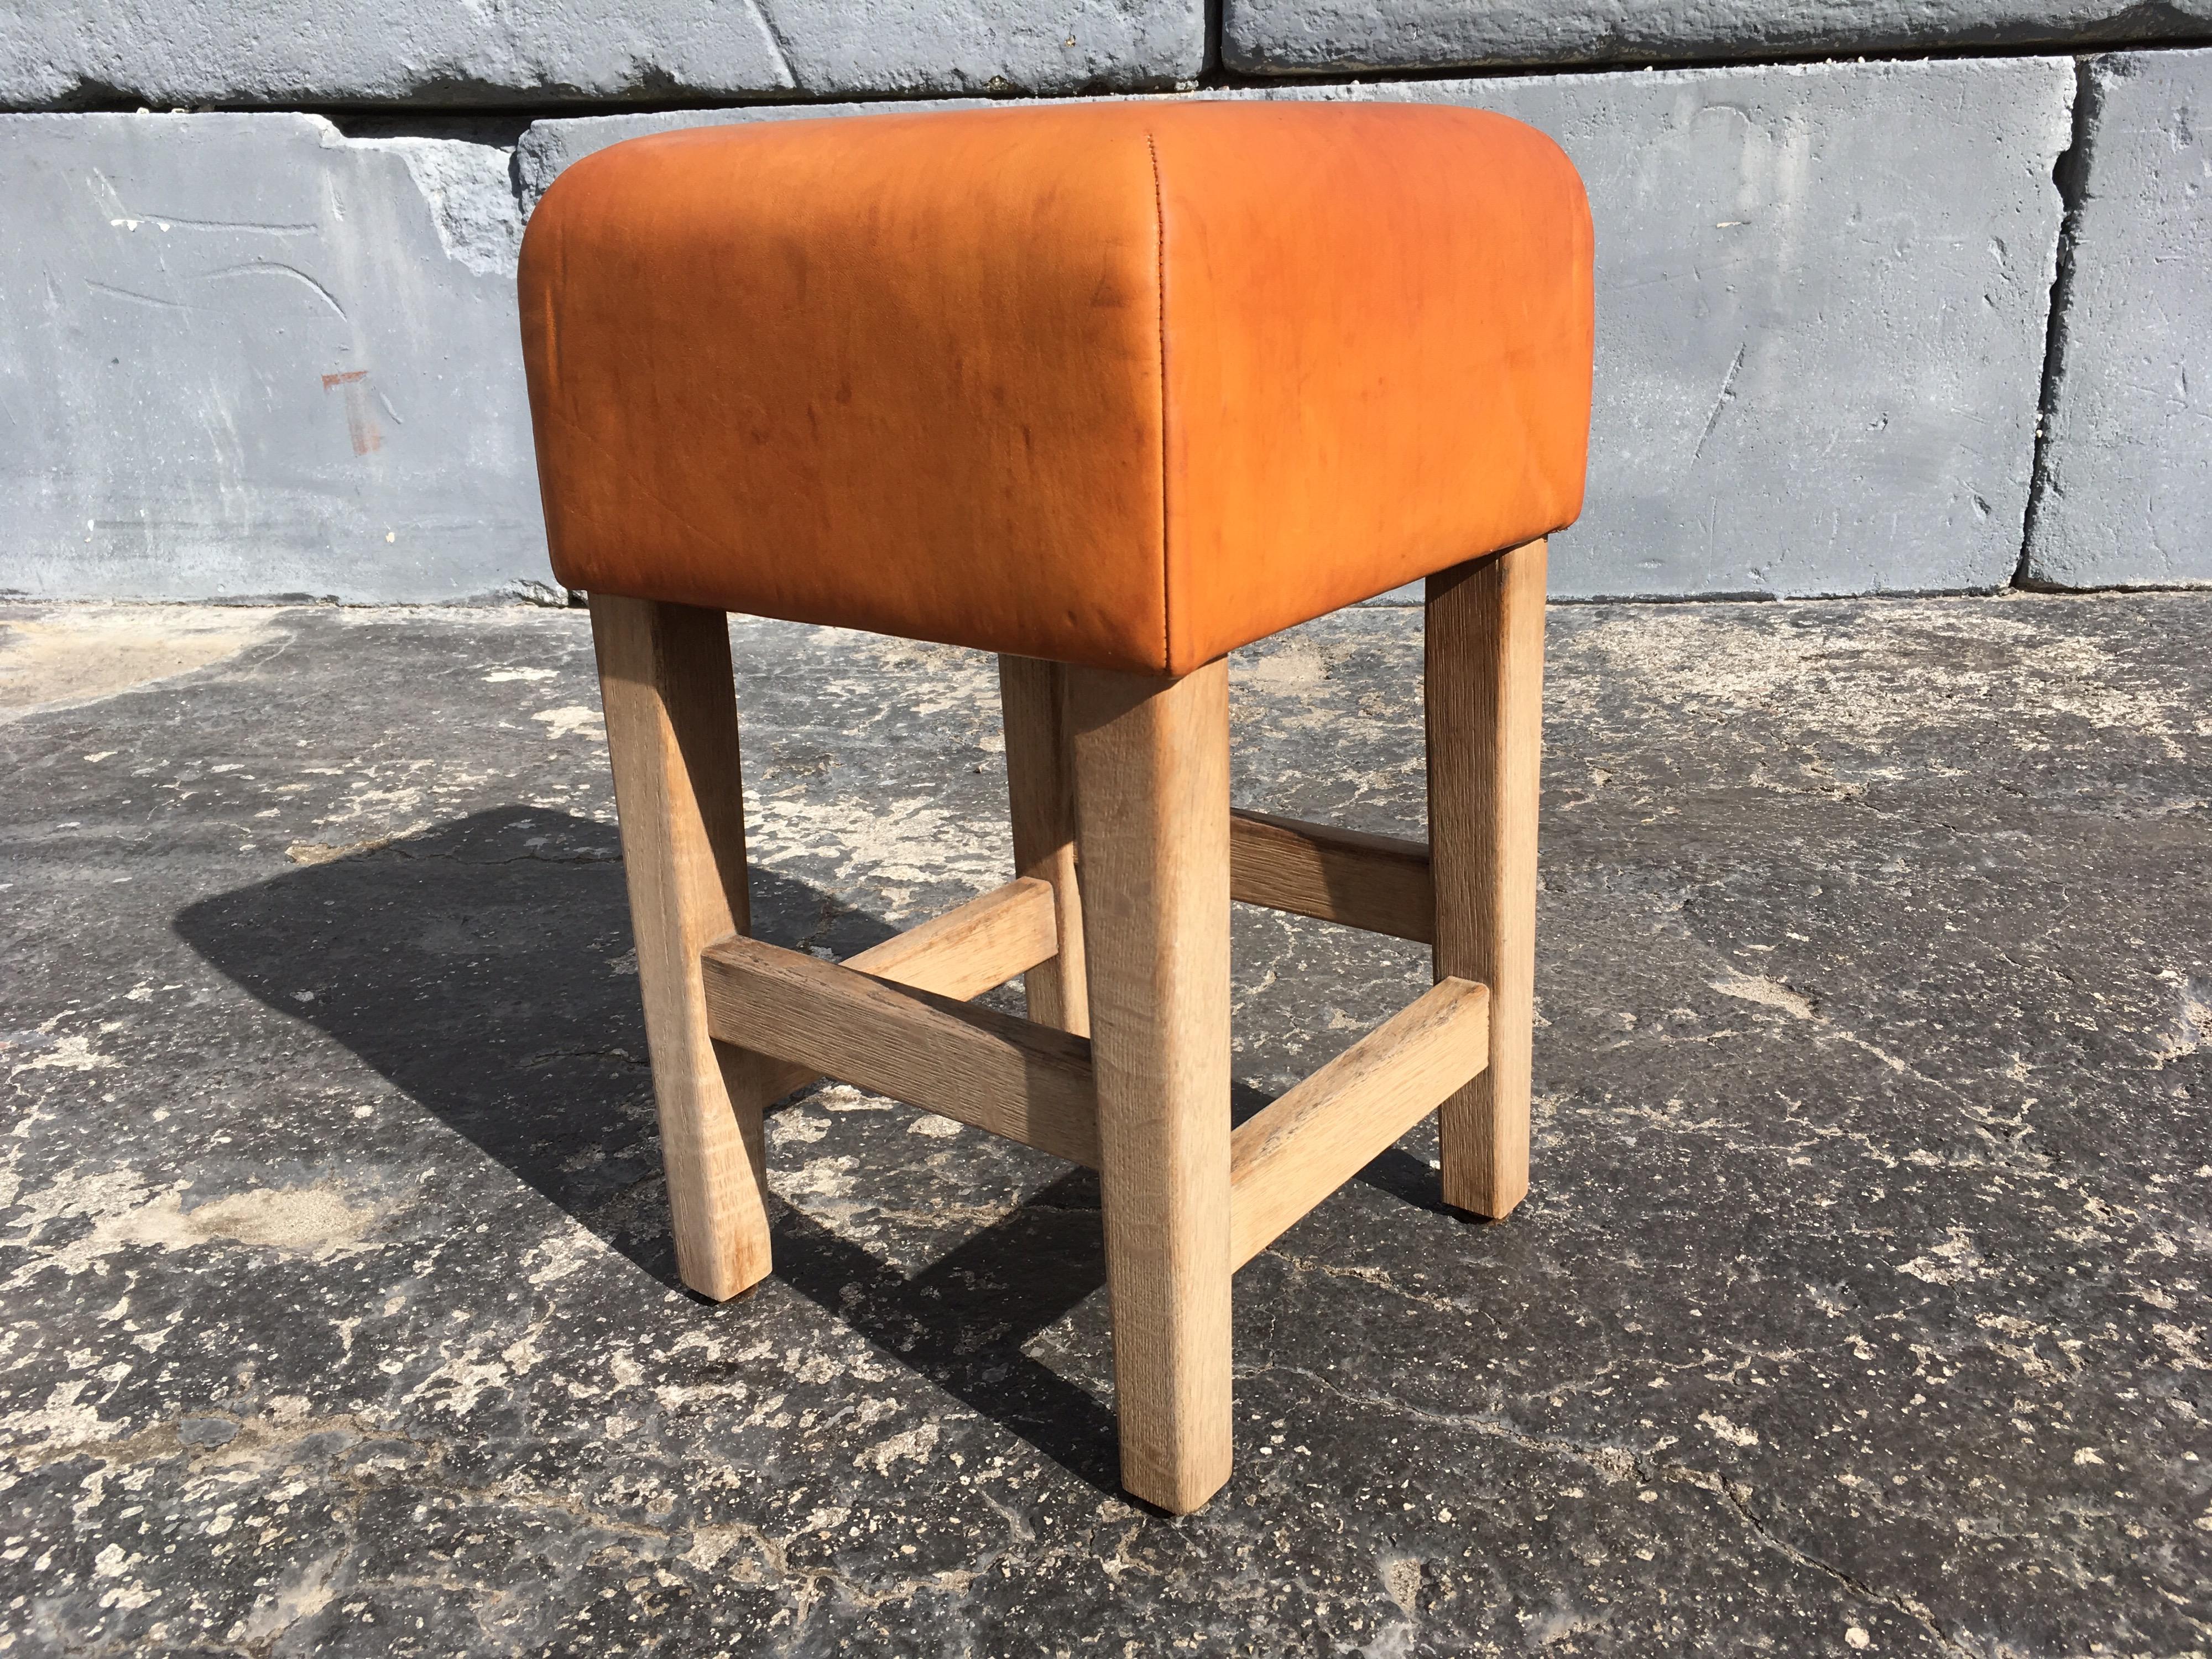 Late 20th Century Oak and Cognac Saddle Leather Stools or Chairs in the Style of Jean-Michel Frank